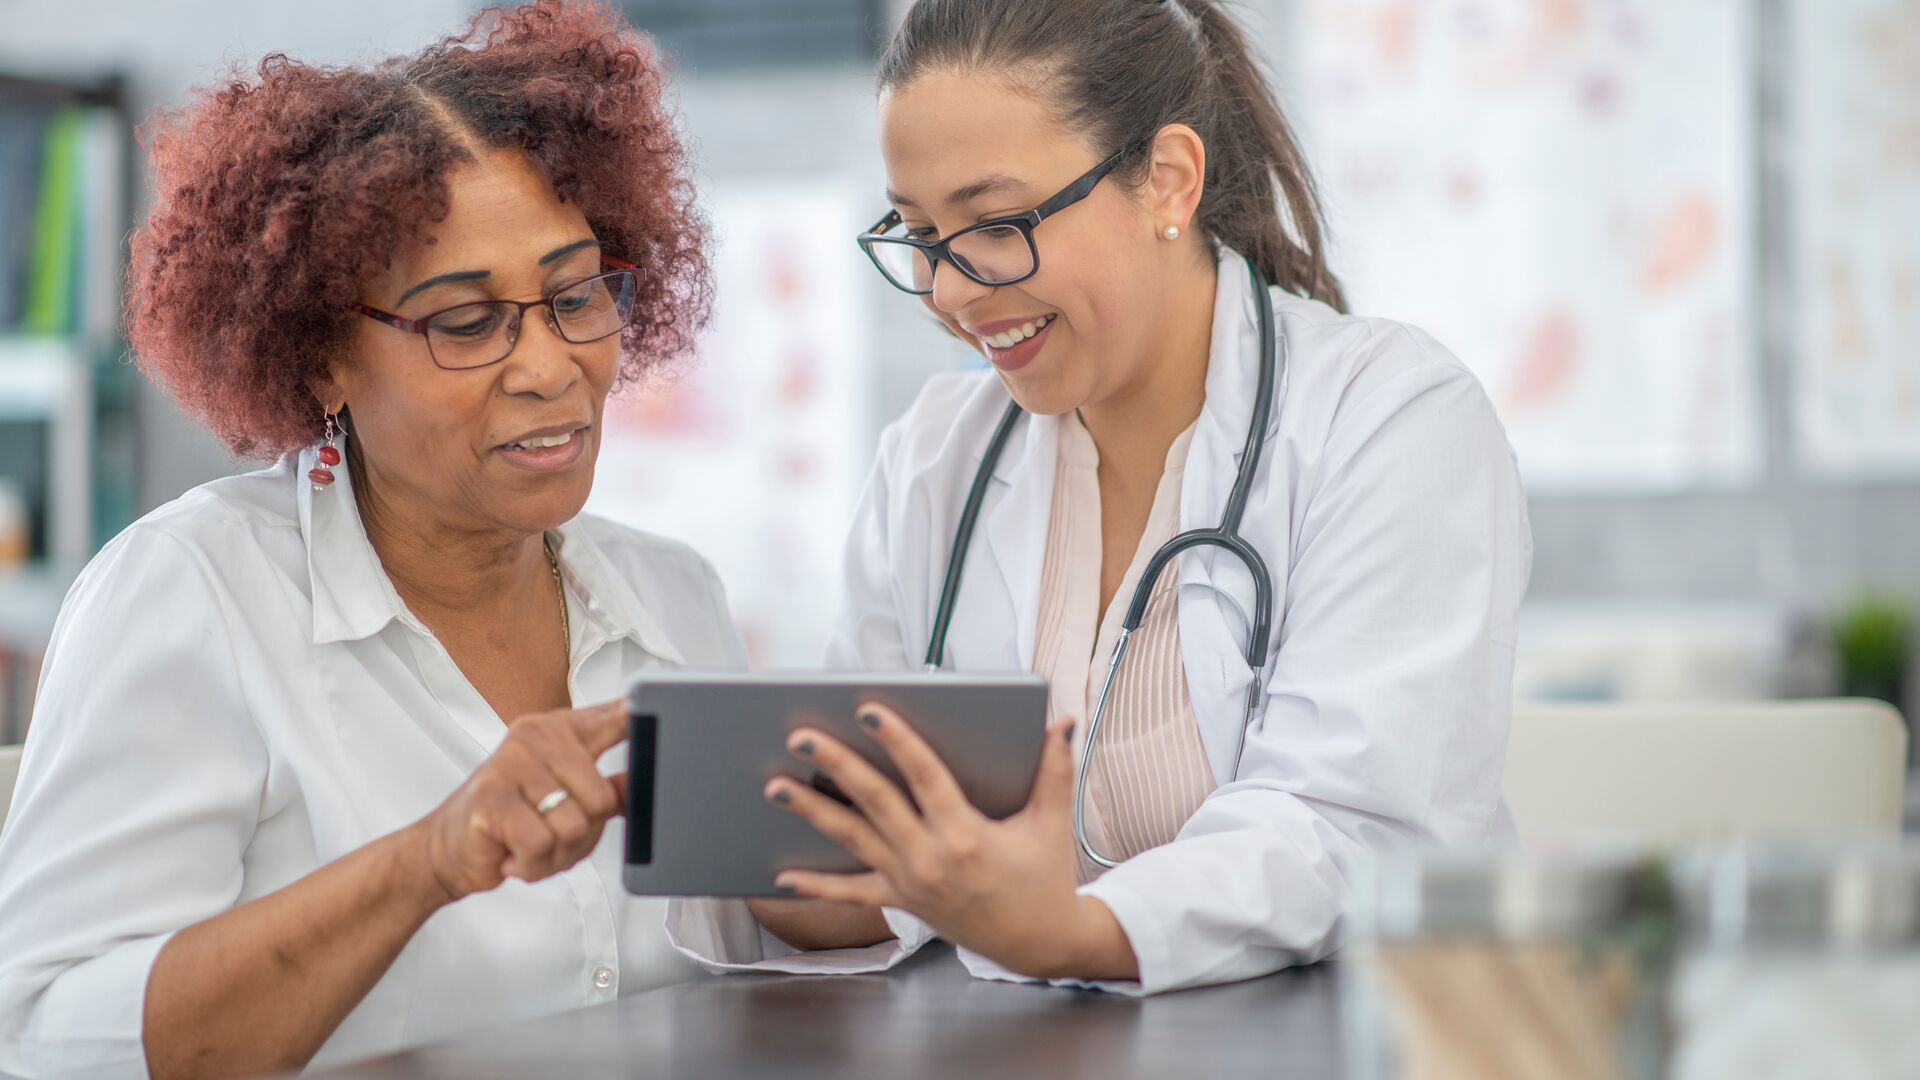 Applied Health Care data as health care professionals go over data with a patient on a tablet.